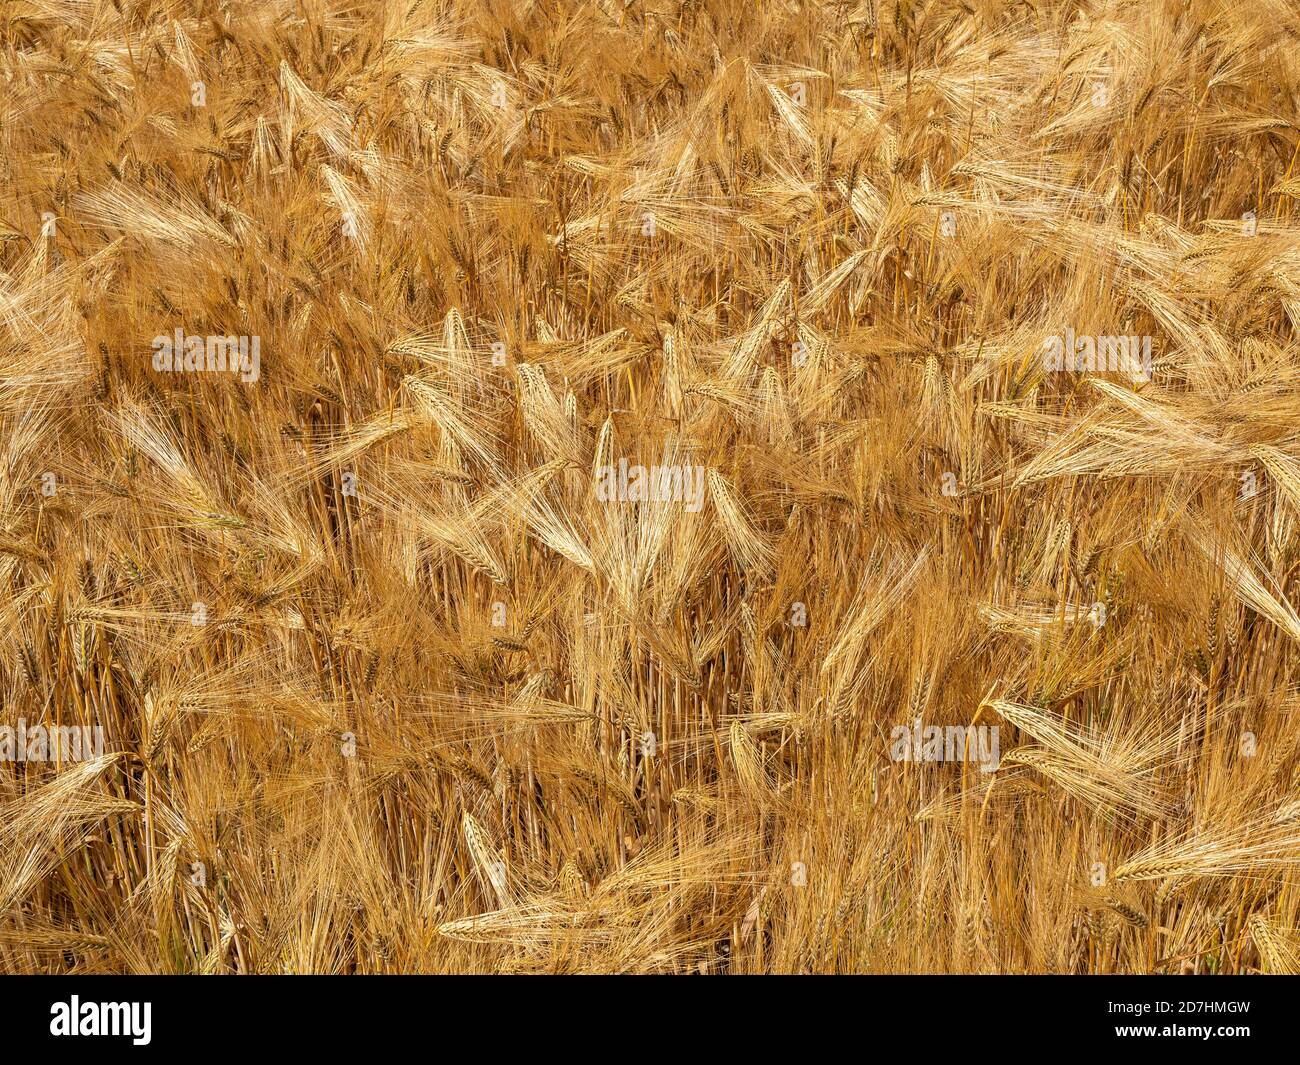 A close up of a small part of a field of 6 row barley ripe and golden ready for harvest Stock Photo